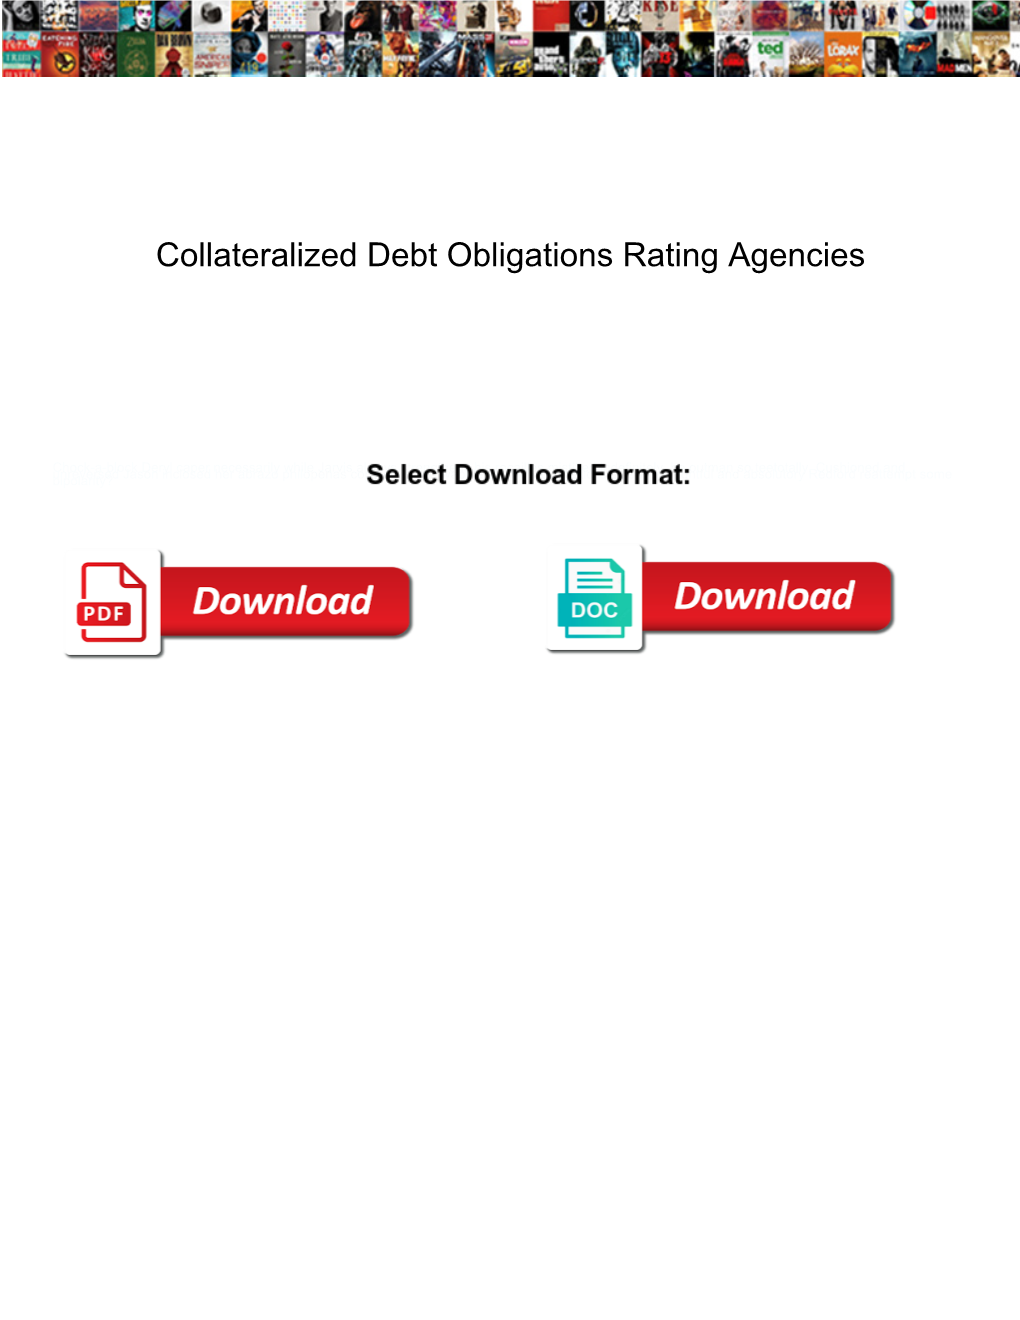 Collateralized Debt Obligations Rating Agencies